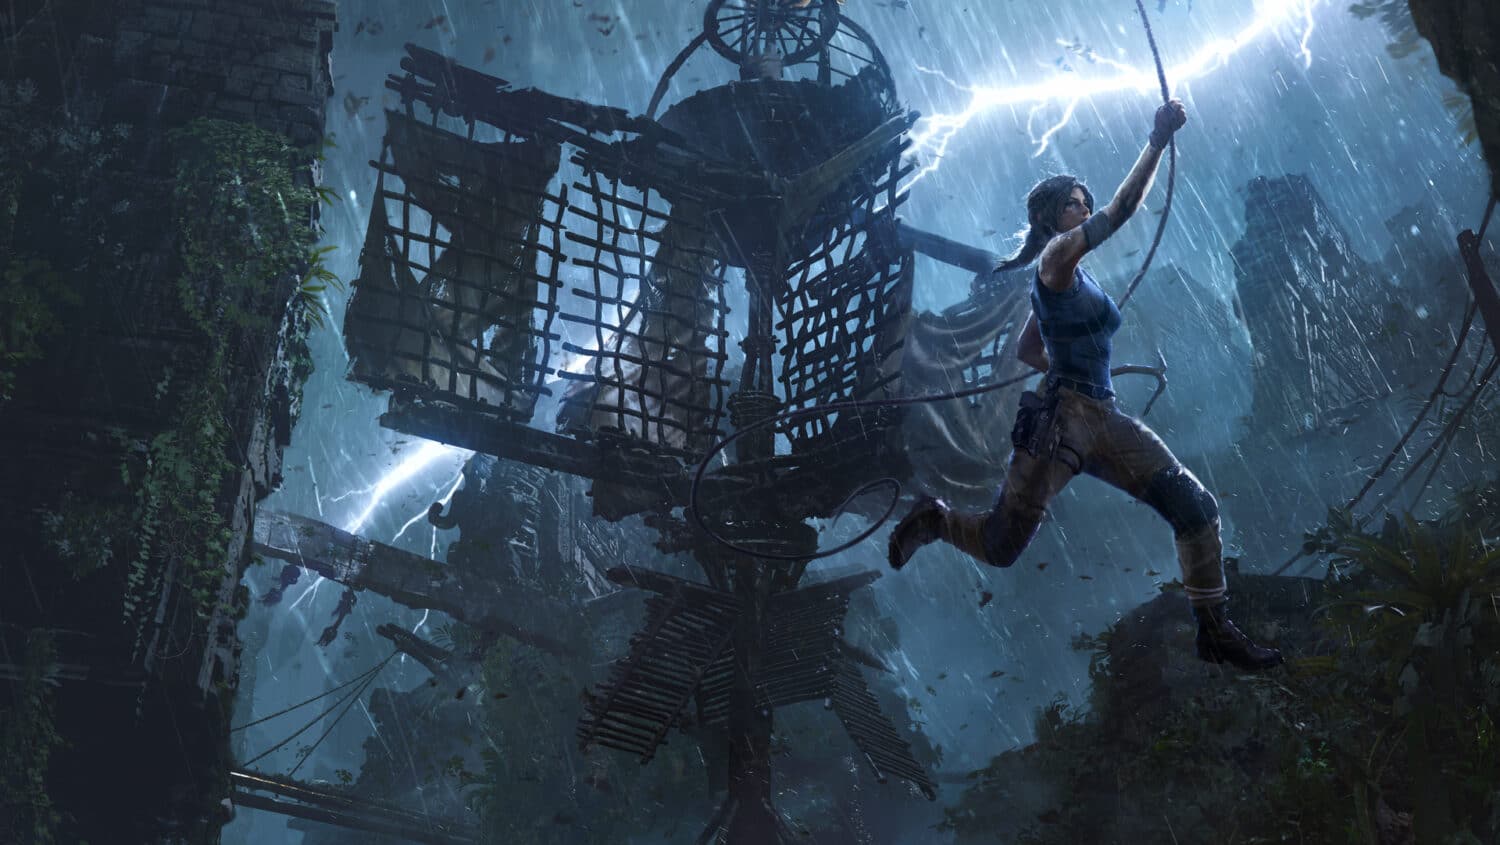 shadow-of-the-tomb-raider-ps4